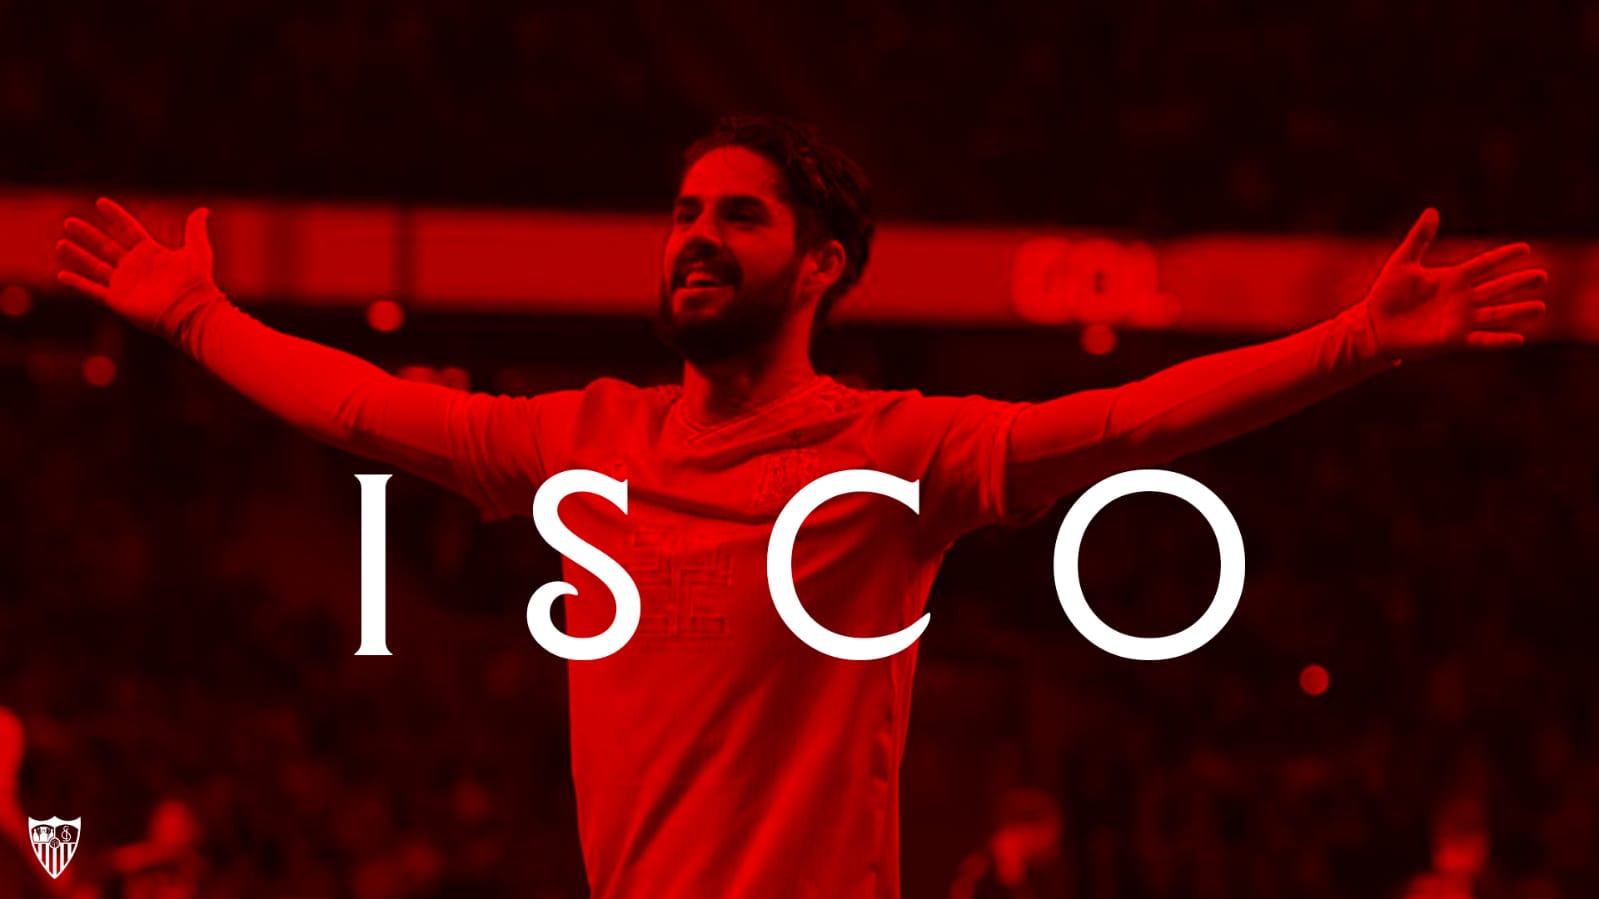 Agreement in principle for Isco